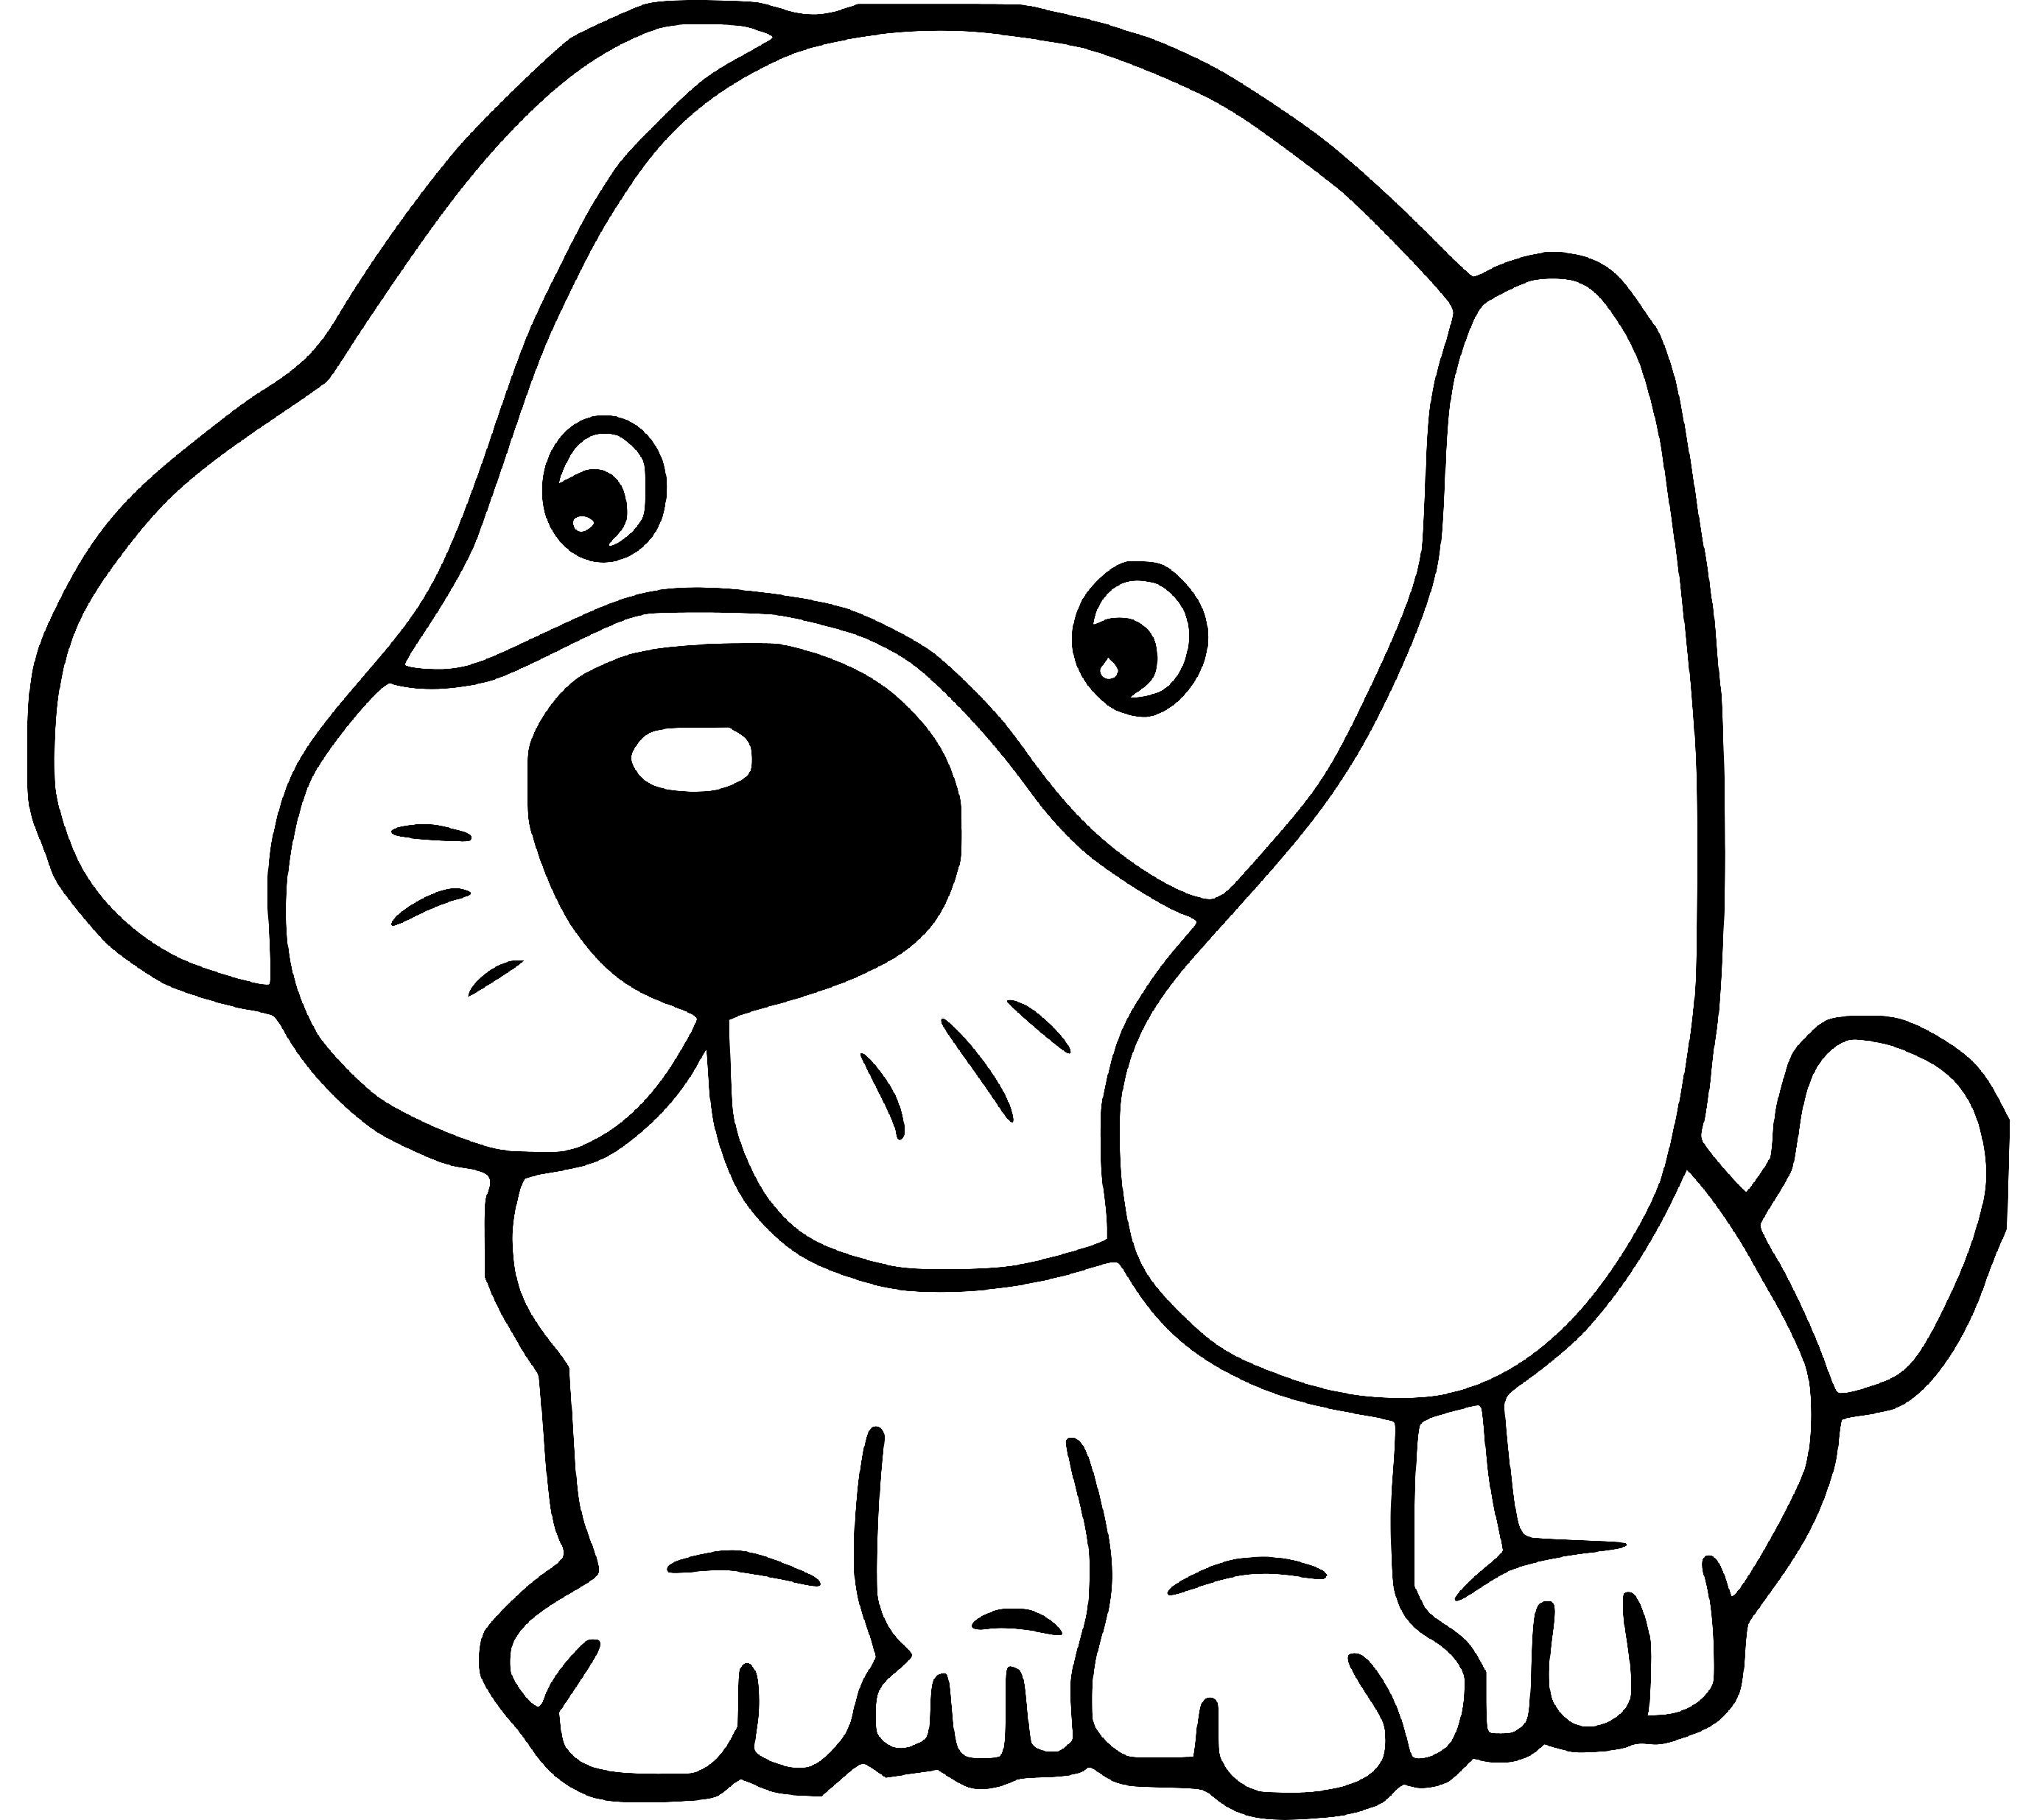 Printable Puppy seems tired Coloring Page for kids.